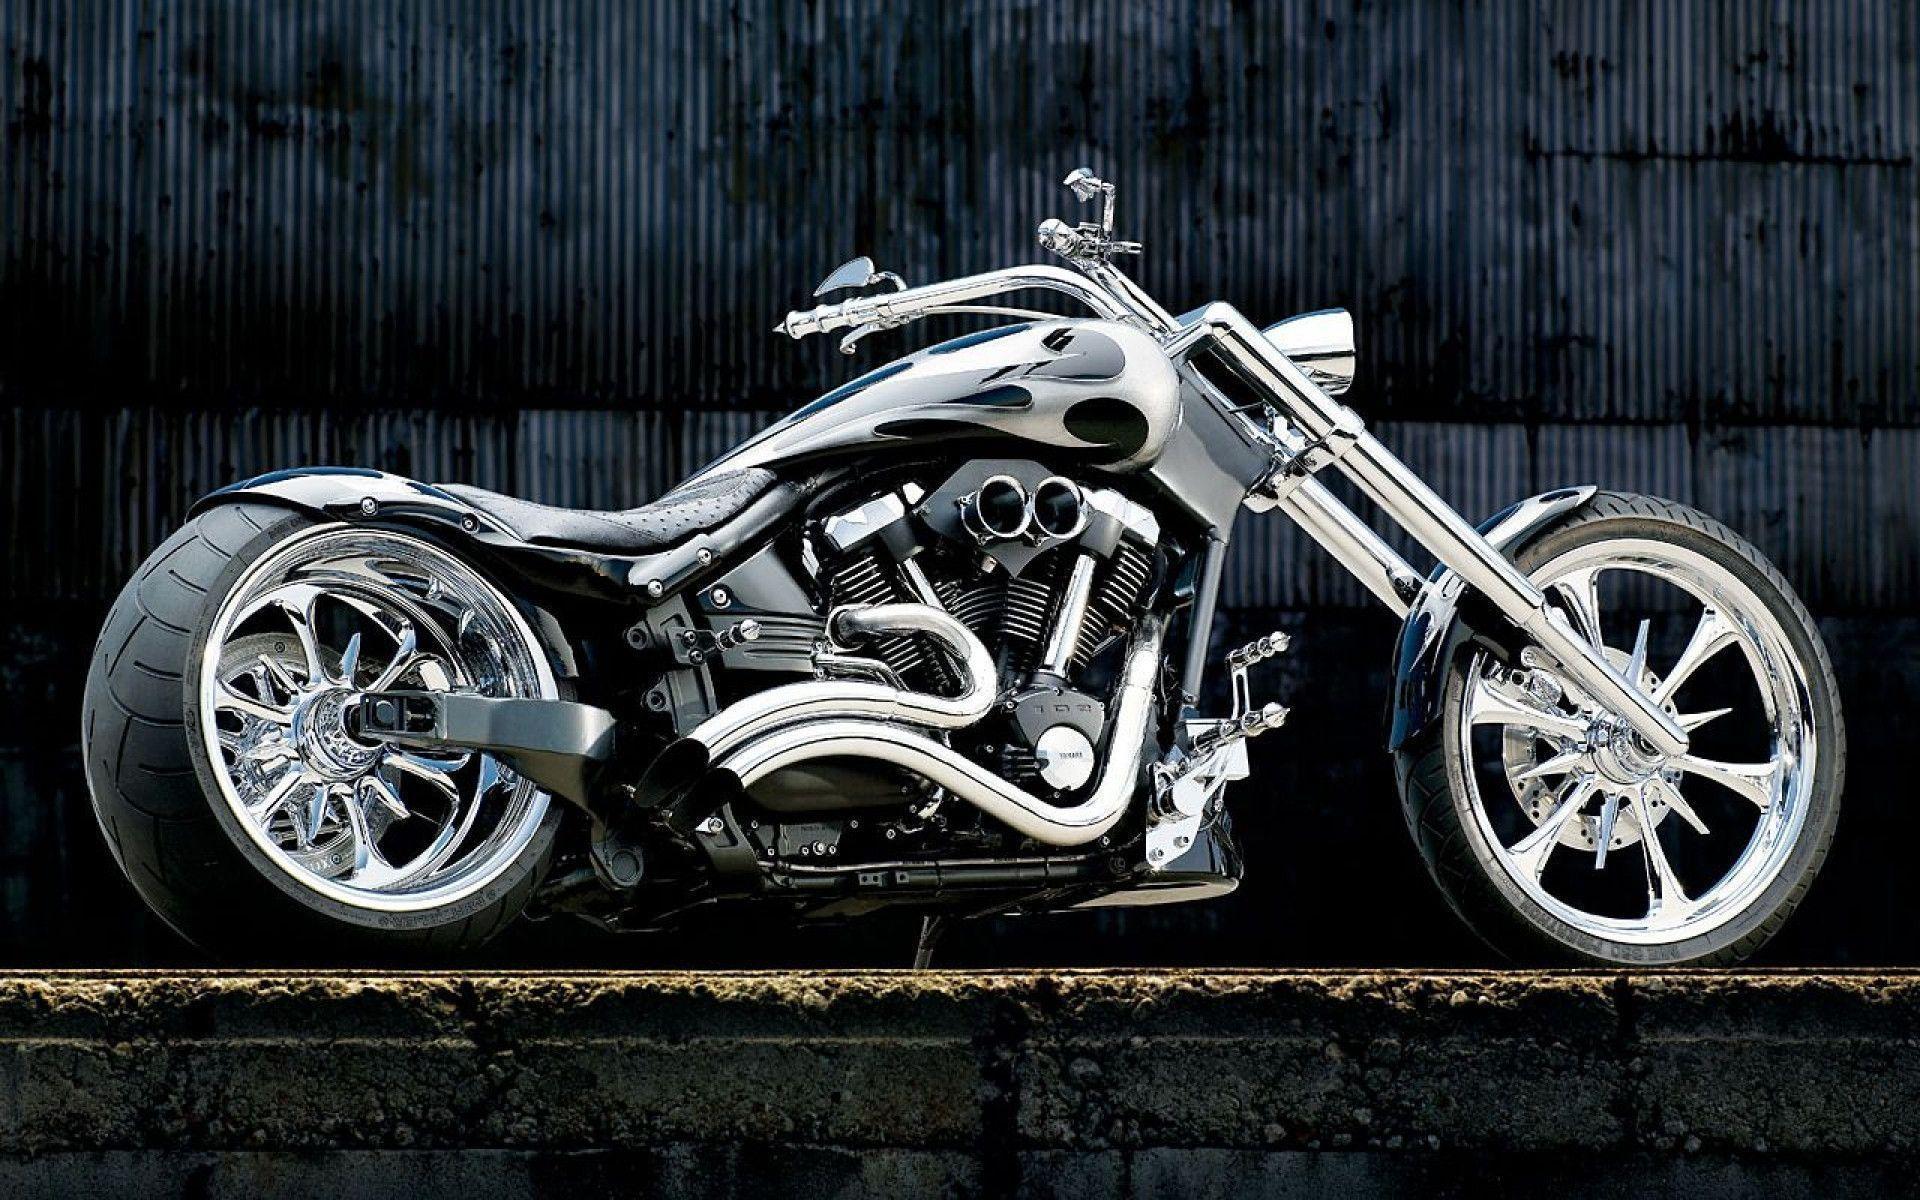 Excellent HD Wallpaper Motorcycle Chrome 1920x1200PX Motorcycle